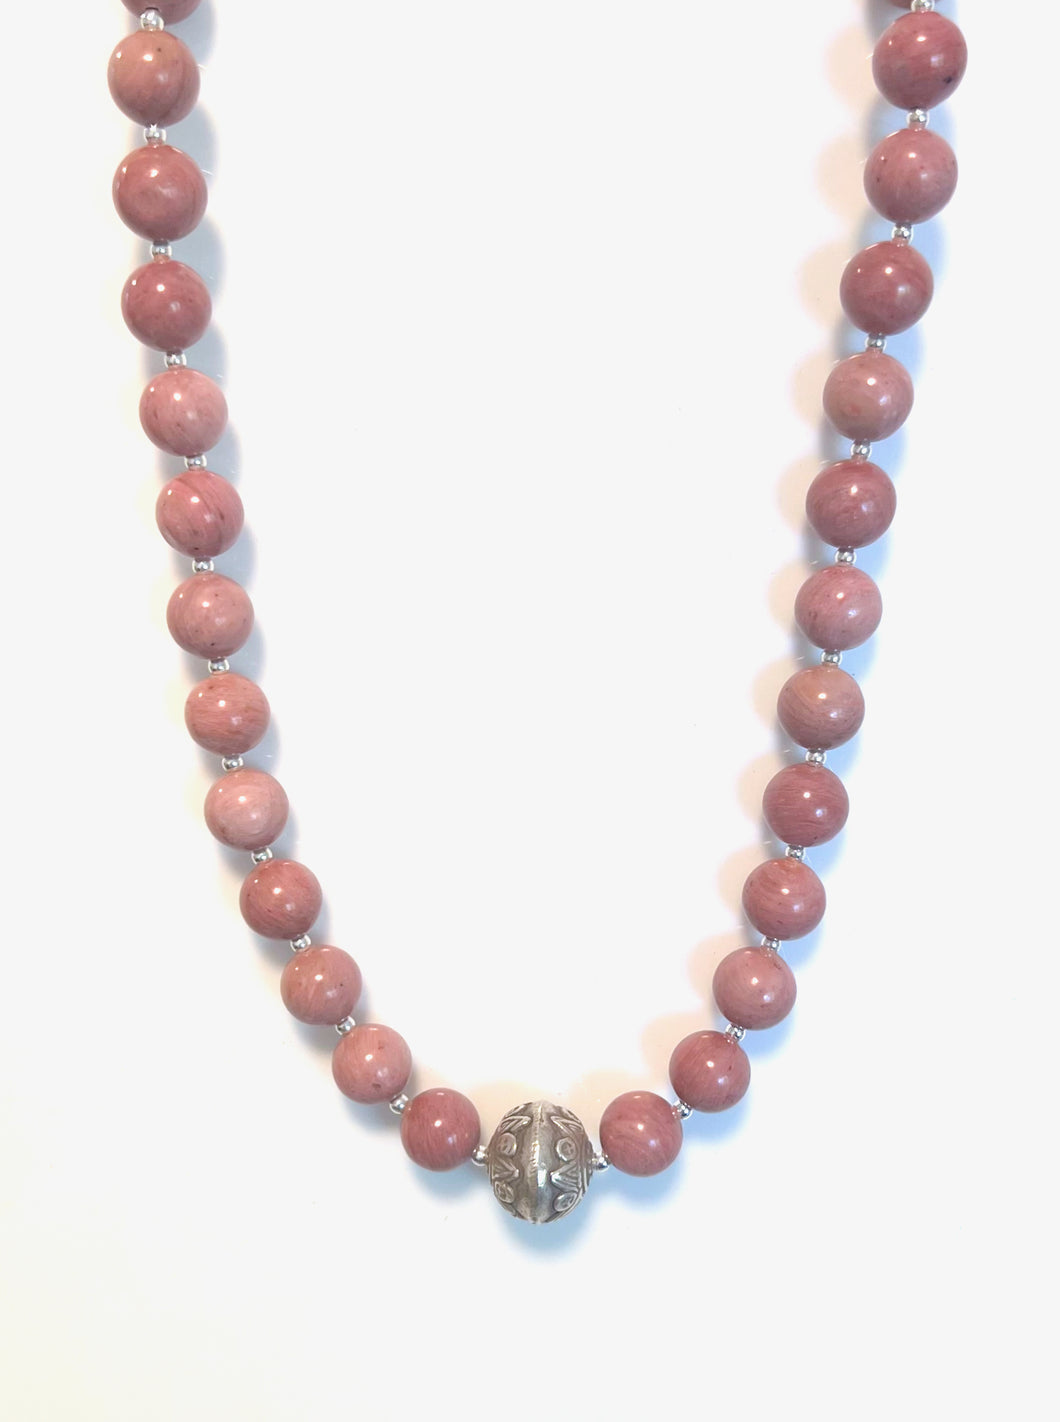 Australian Handmade Pink Necklace with Rhodonite and Sterling Silver Centrepiece